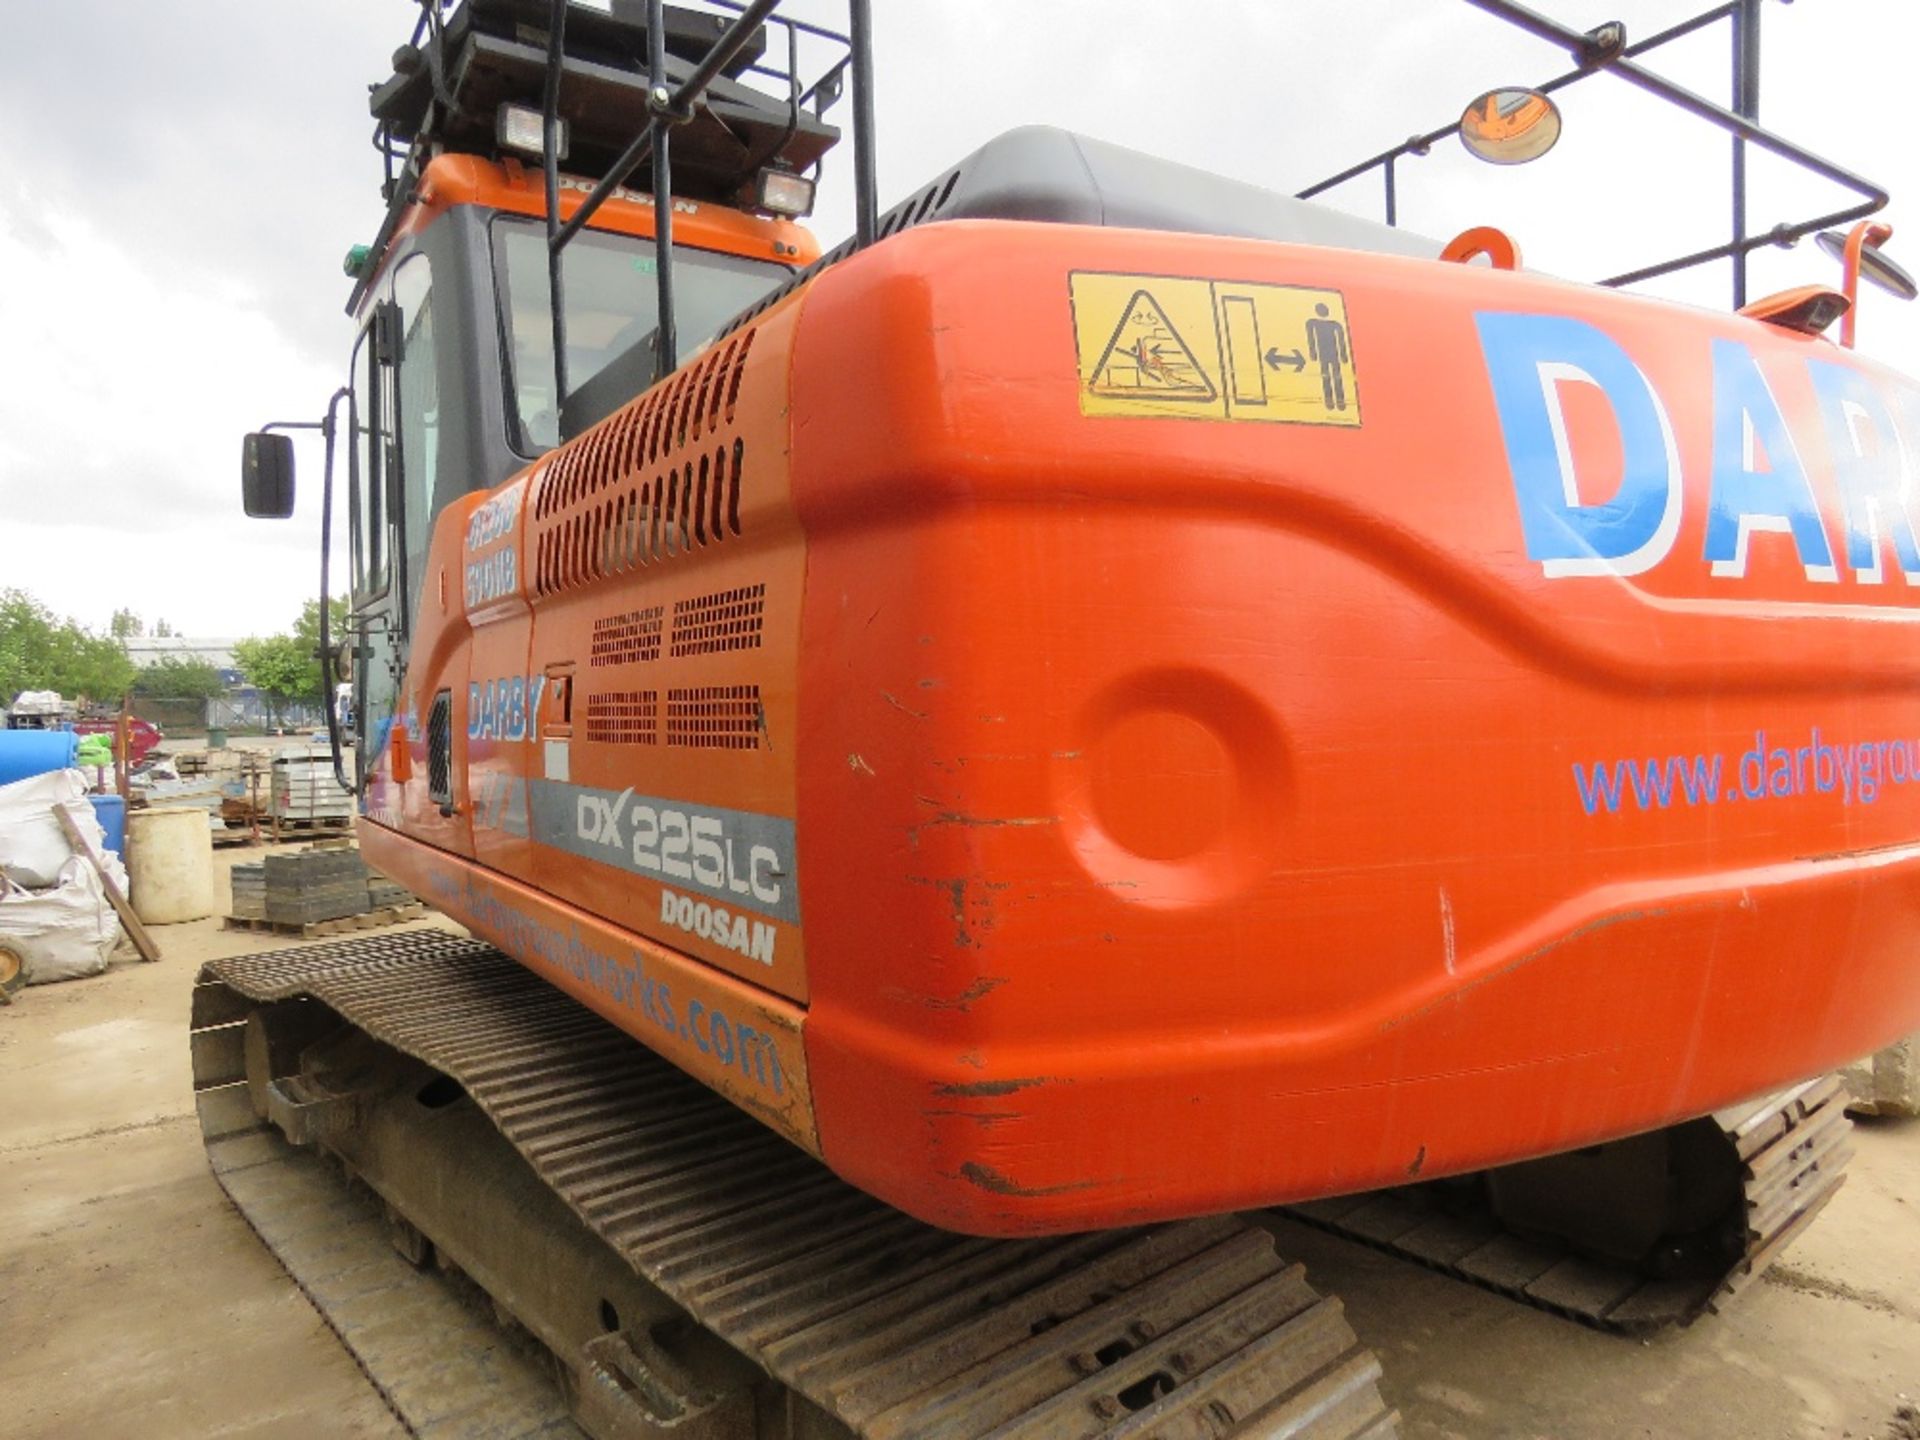 DOOSAN DX225LC-3 STEEL TRACKED EXCAVATOR 2016 BUILD. Non adblue!! only 10% plus vat BP on this lot - Image 13 of 16